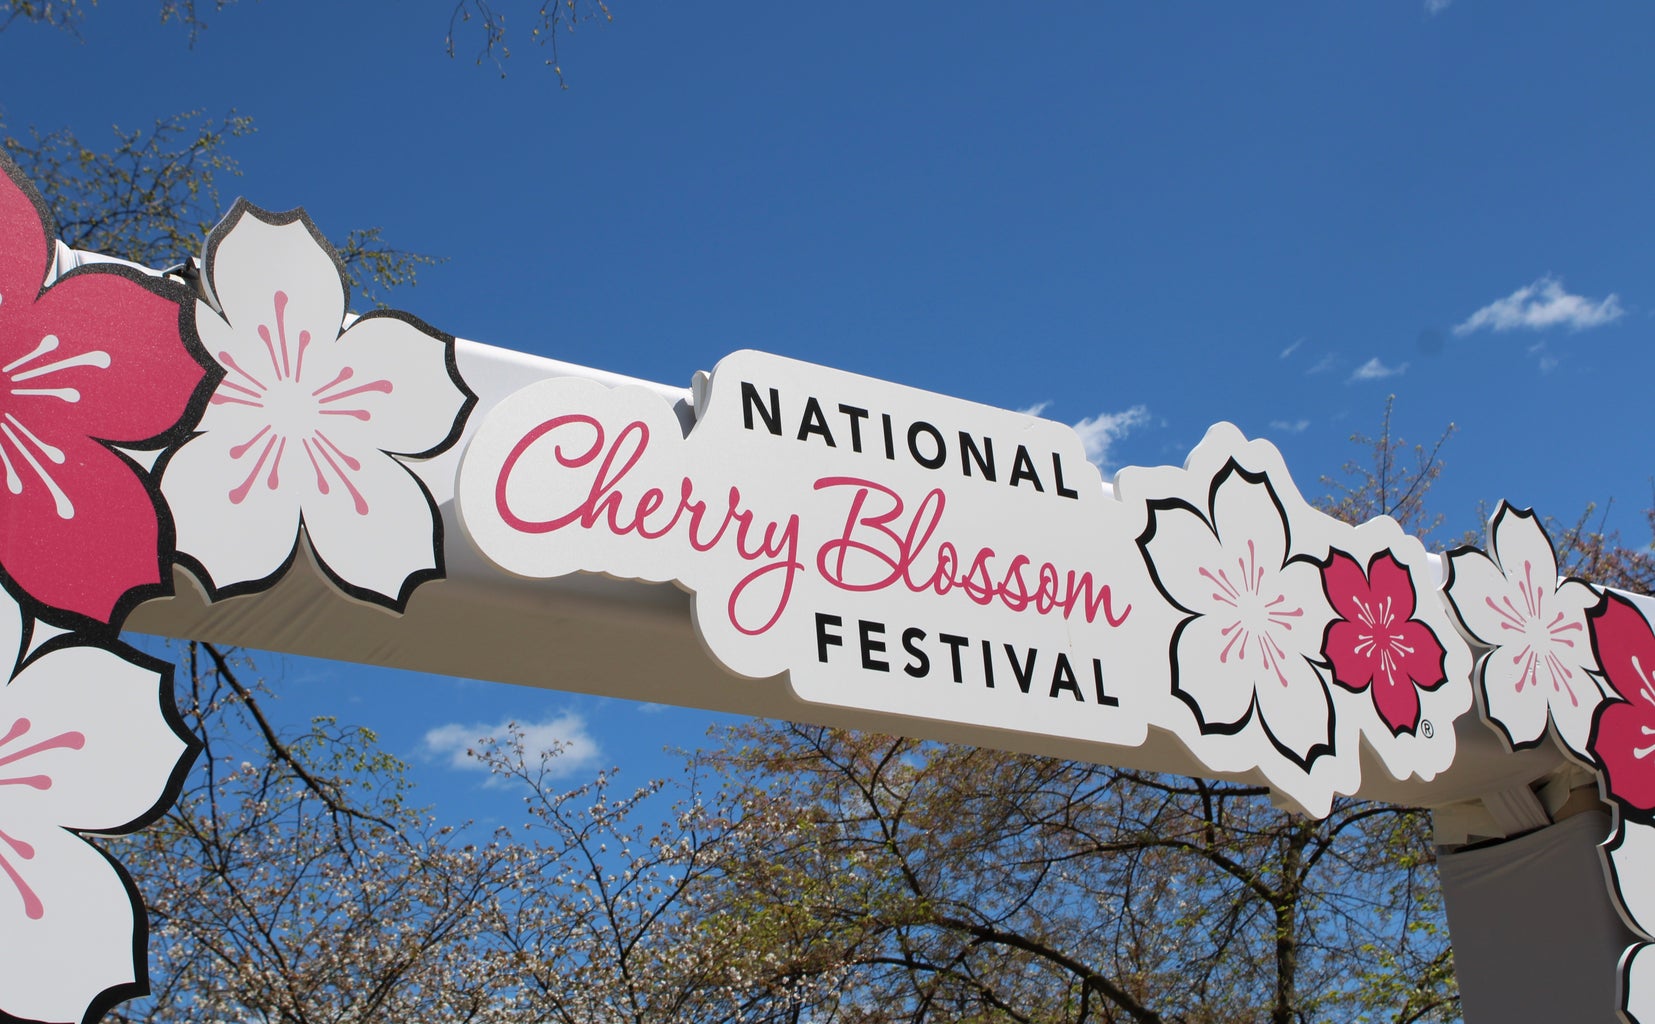 A sign for the National Cherry Blossom Festival in Washington D.C.